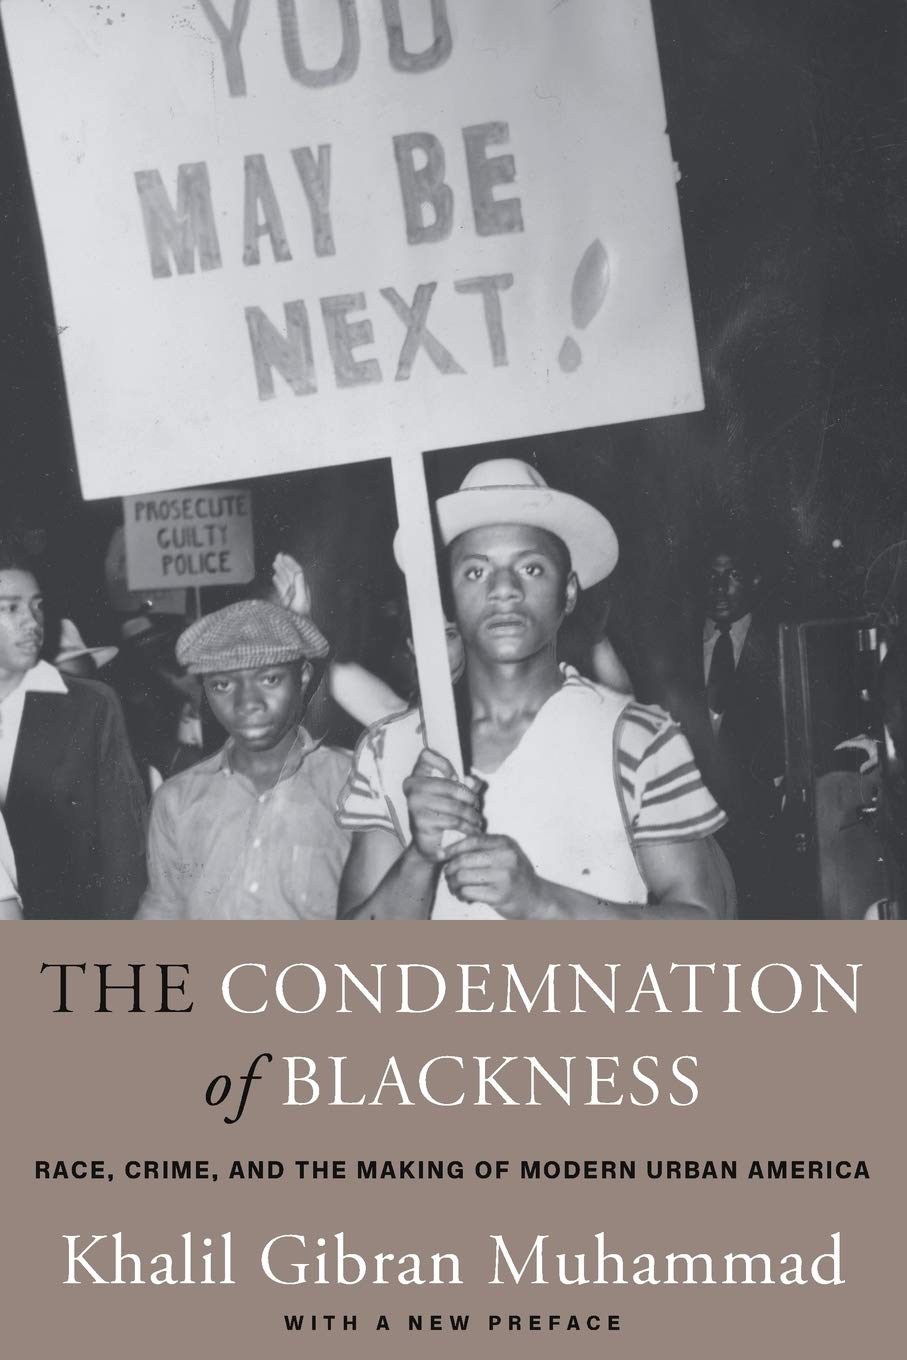 The Condemnation of Blackness: Race, Crime, and the Making of Modern Urban America, with a New Preface - 2nd edition (Paperback)